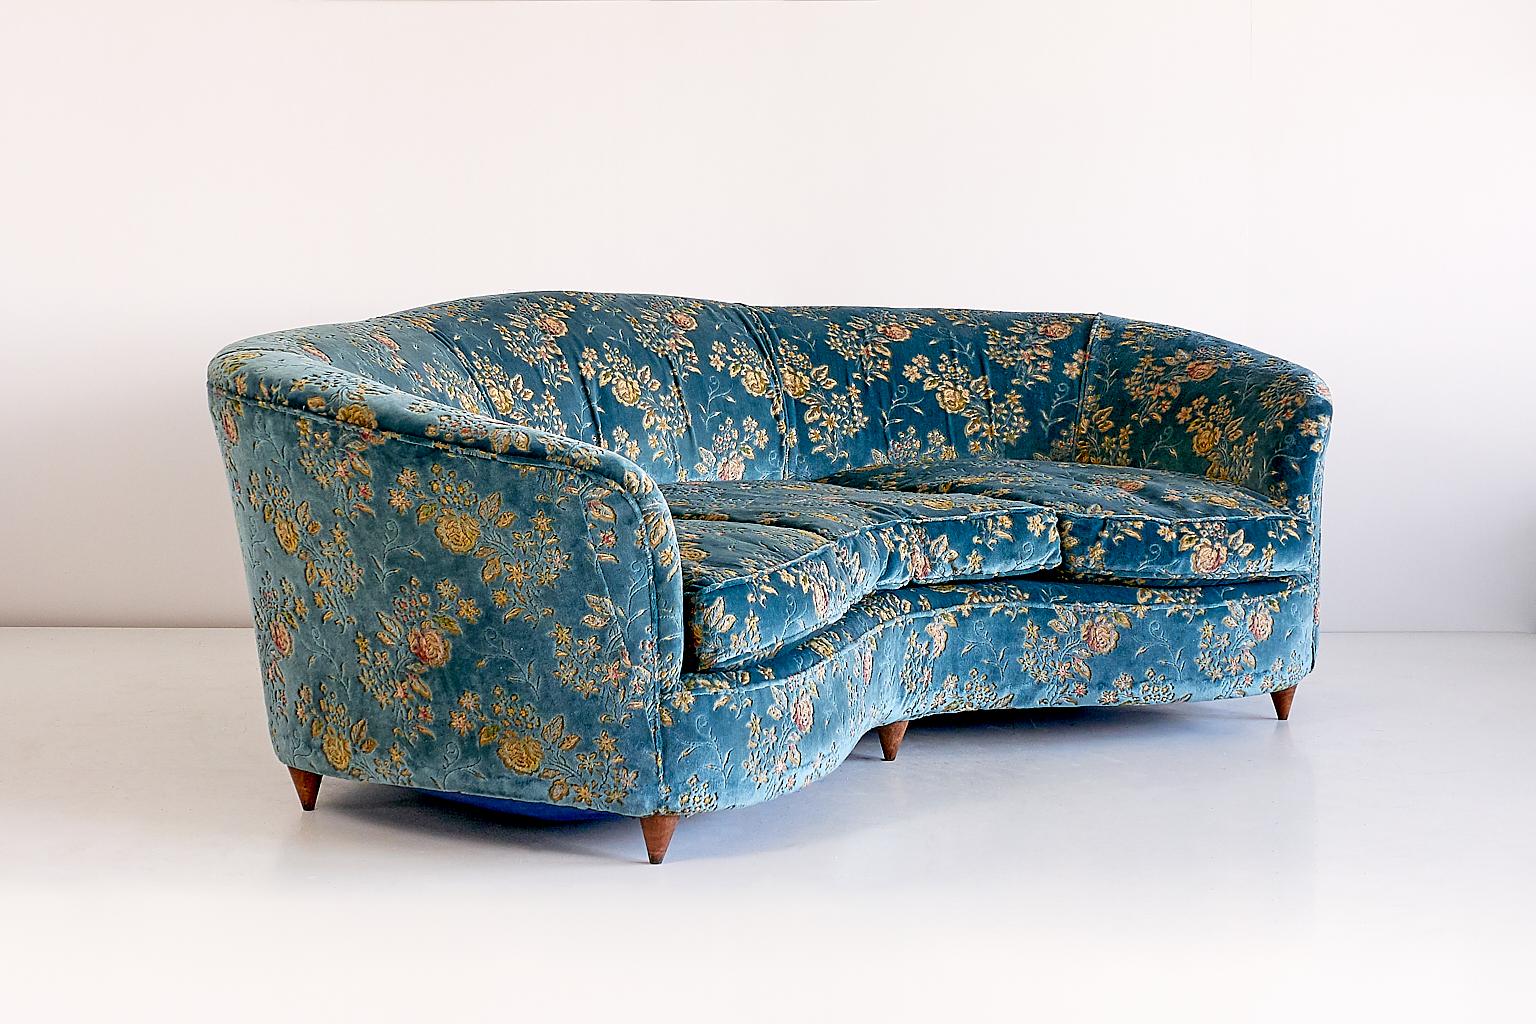 Modern Large Gio Ponti Attributed Curved Sofa in Original Blue Floral Upholstery, 1930s